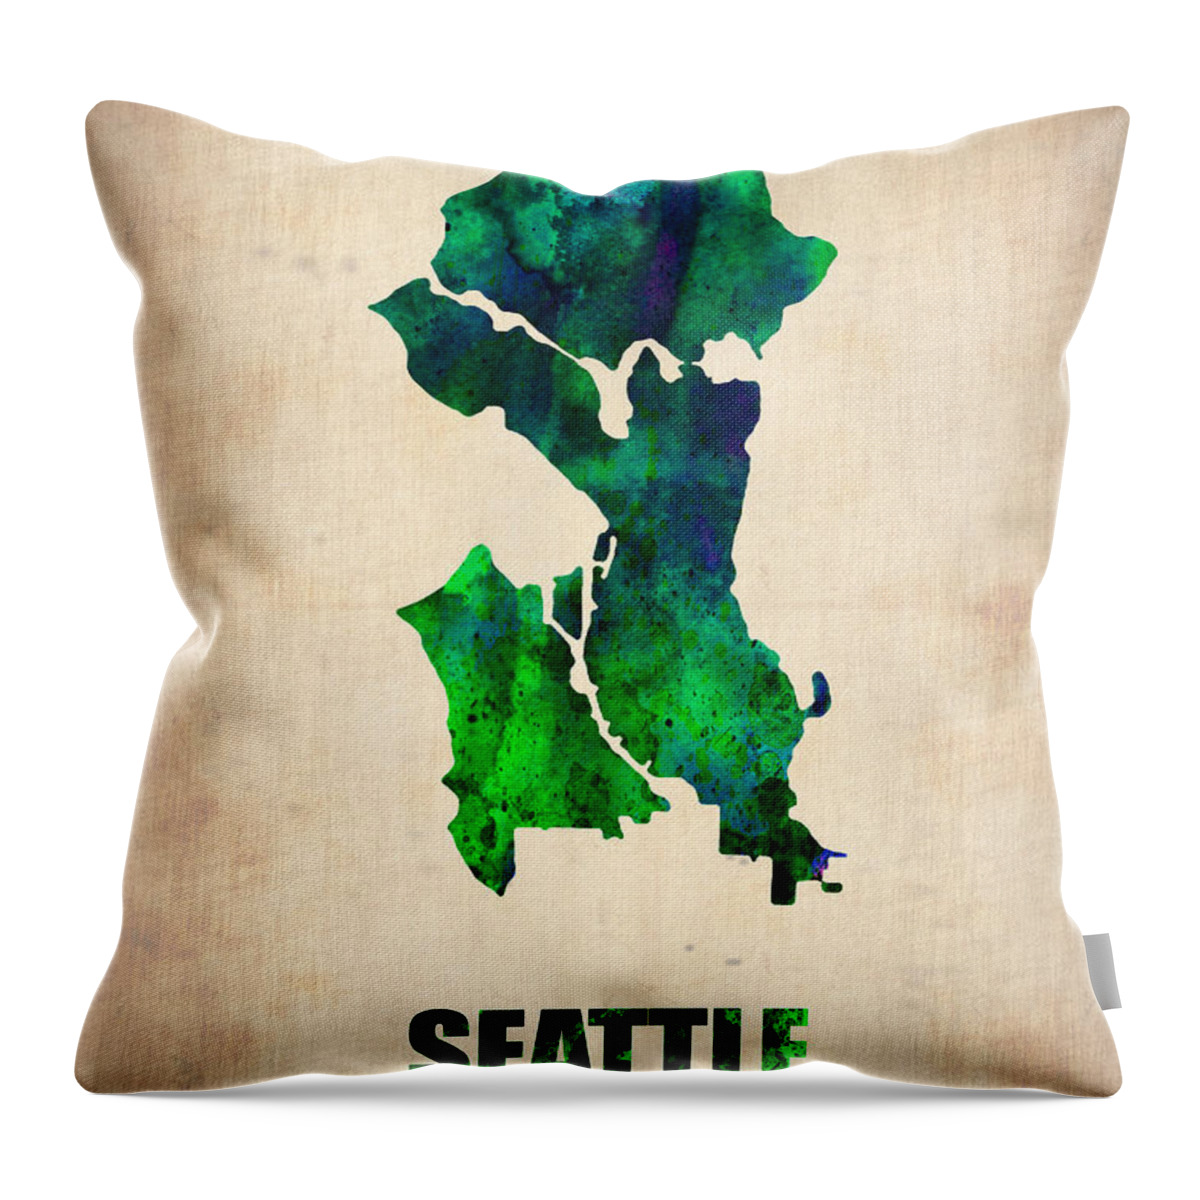 Seattle Throw Pillow featuring the digital art Seattle Watercolor Map #1 by Naxart Studio